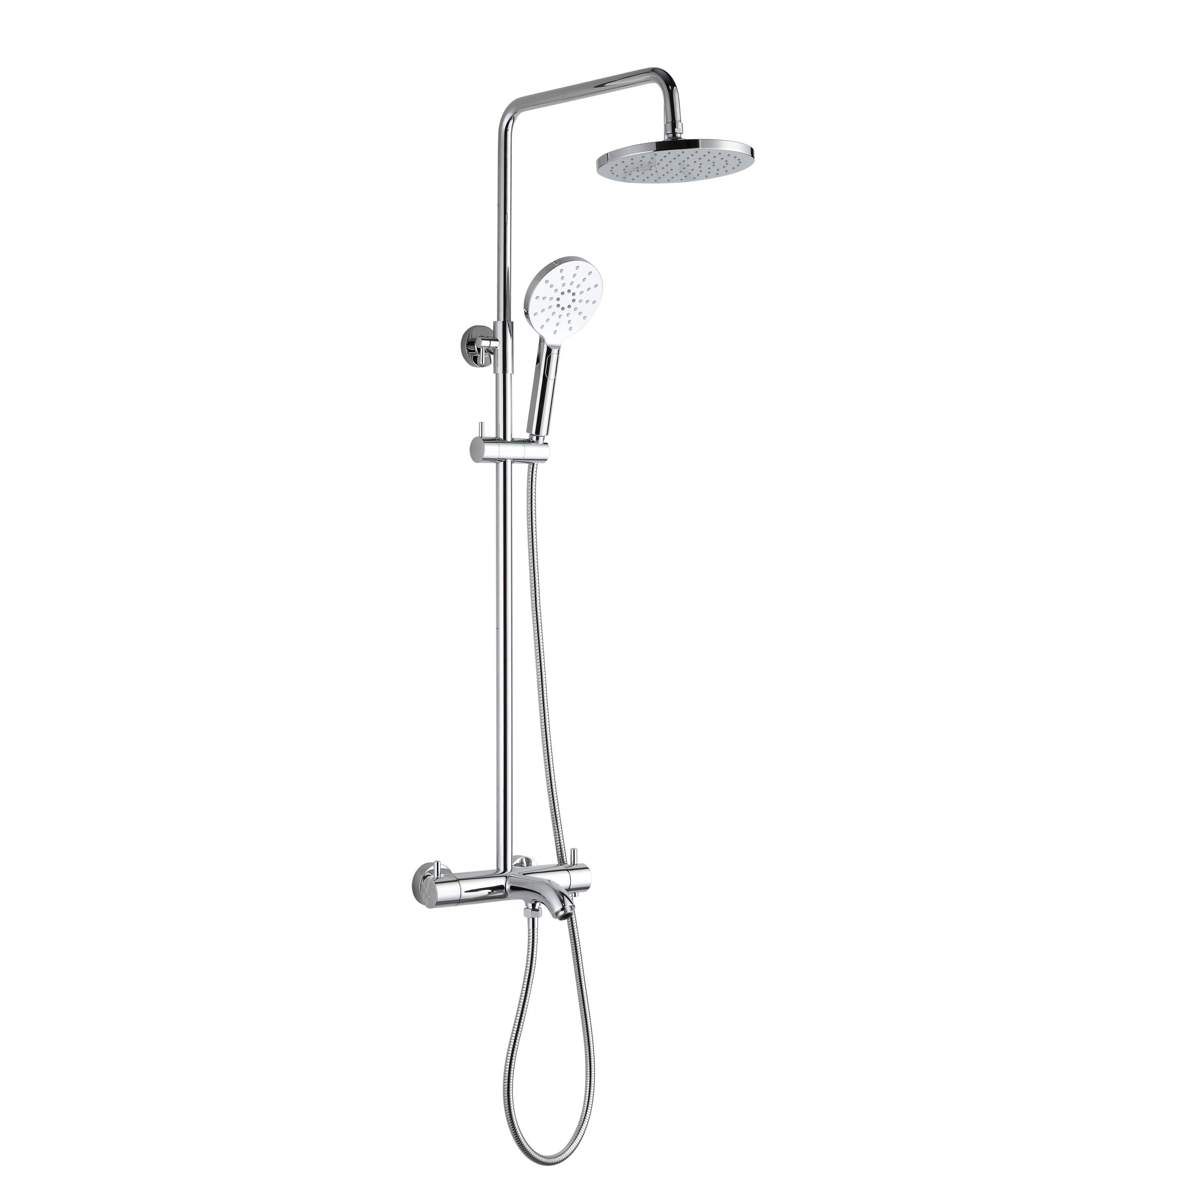 JTP Florence Thermostatic Shower Pole, Adjustable with Overhead Shower, Hand Shower and Bath Spout (55101)